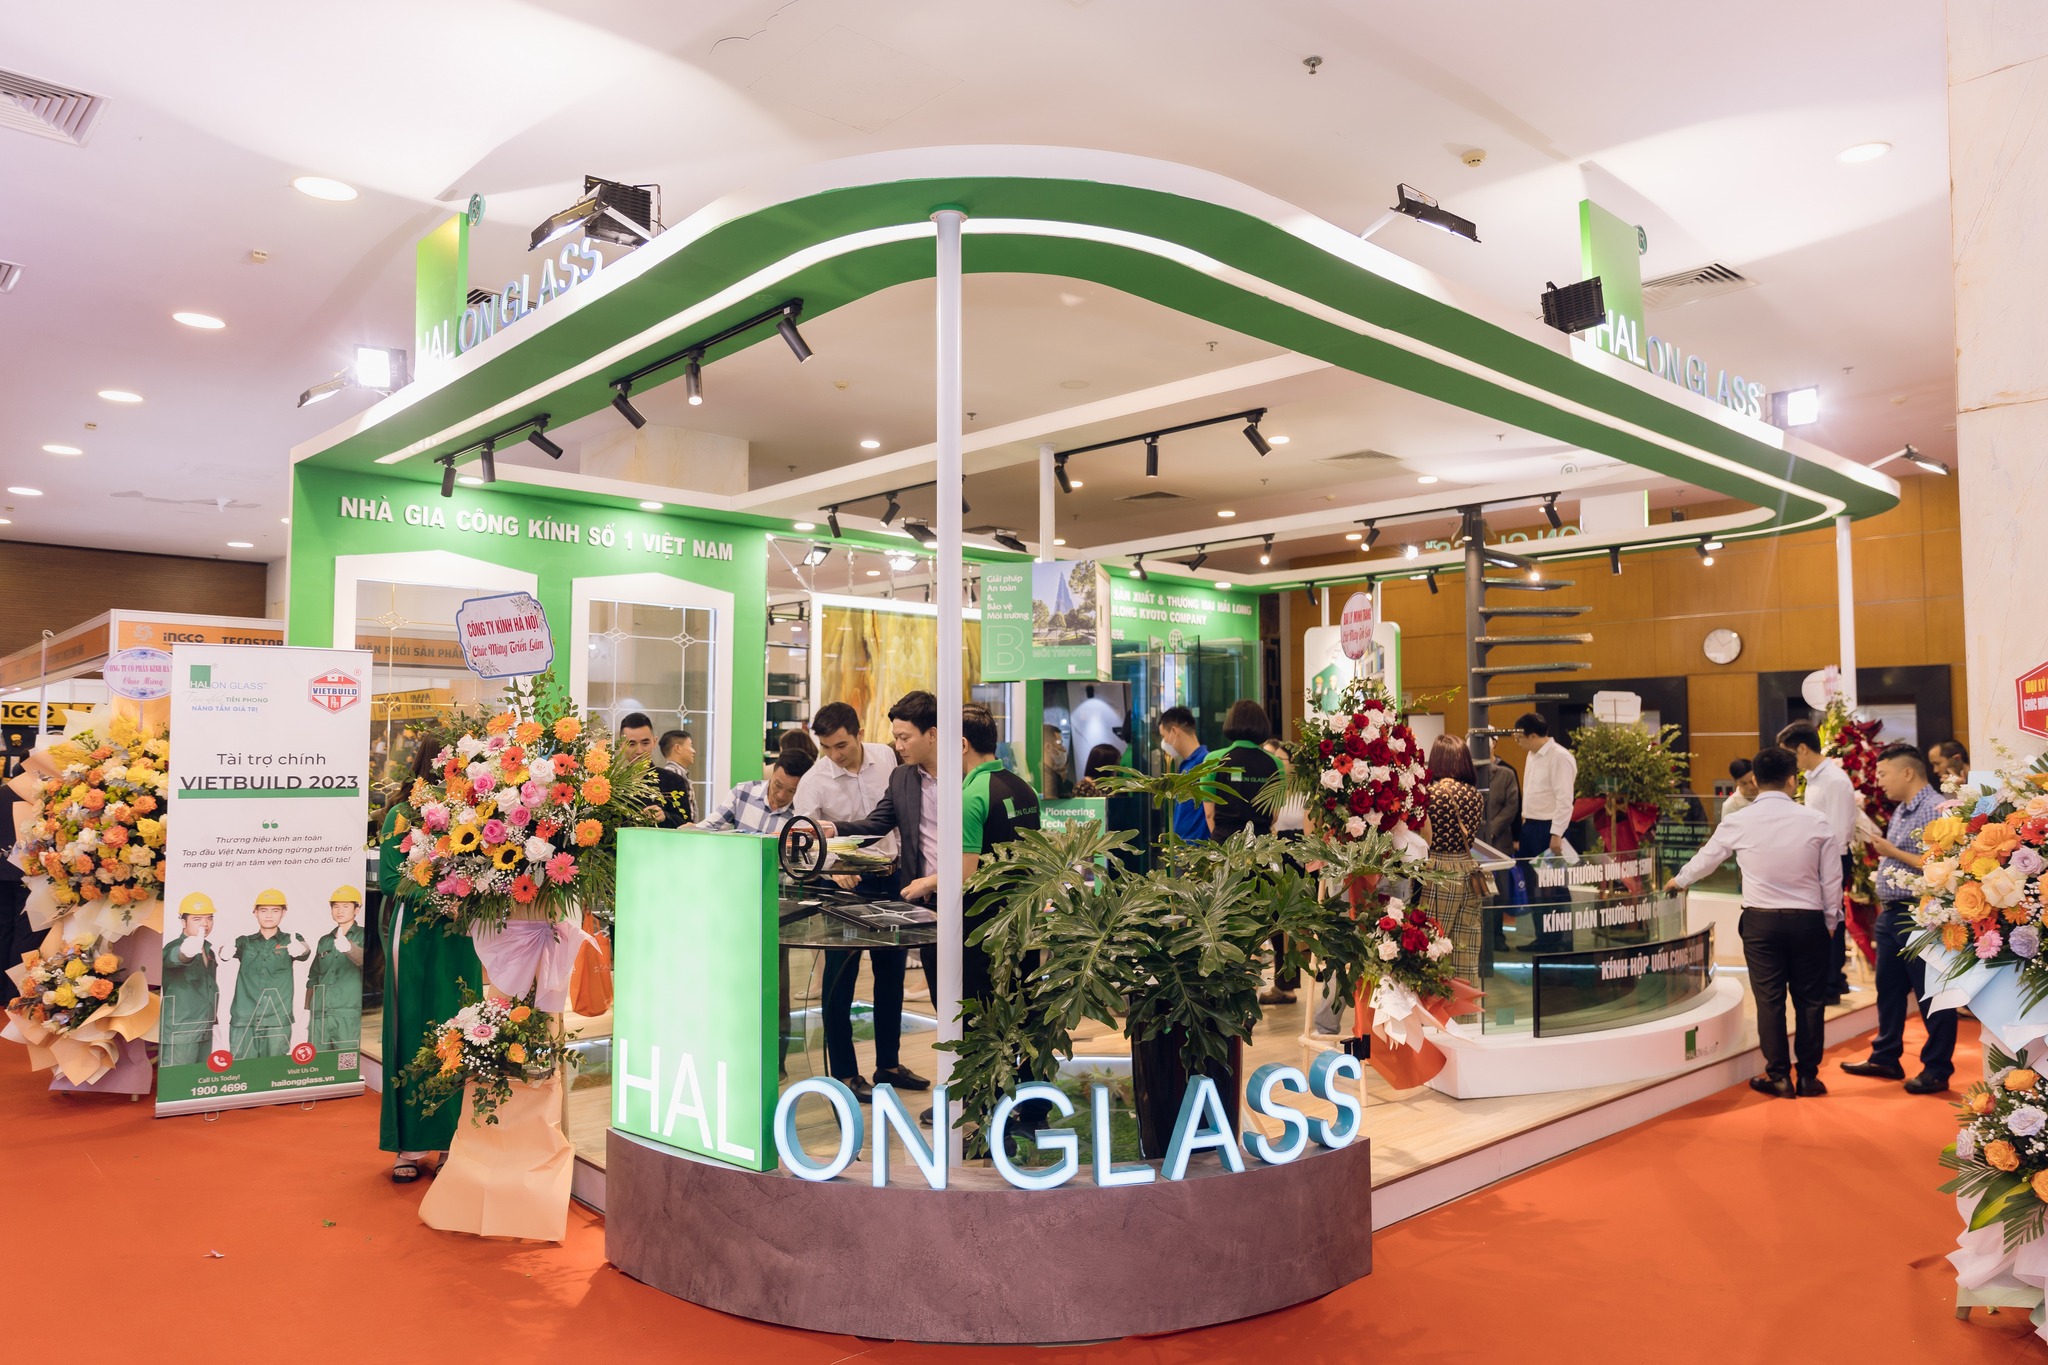 Unique and classy space comes from Hai Long Glass exhibition booth at Vietbuild Hanoi 2023